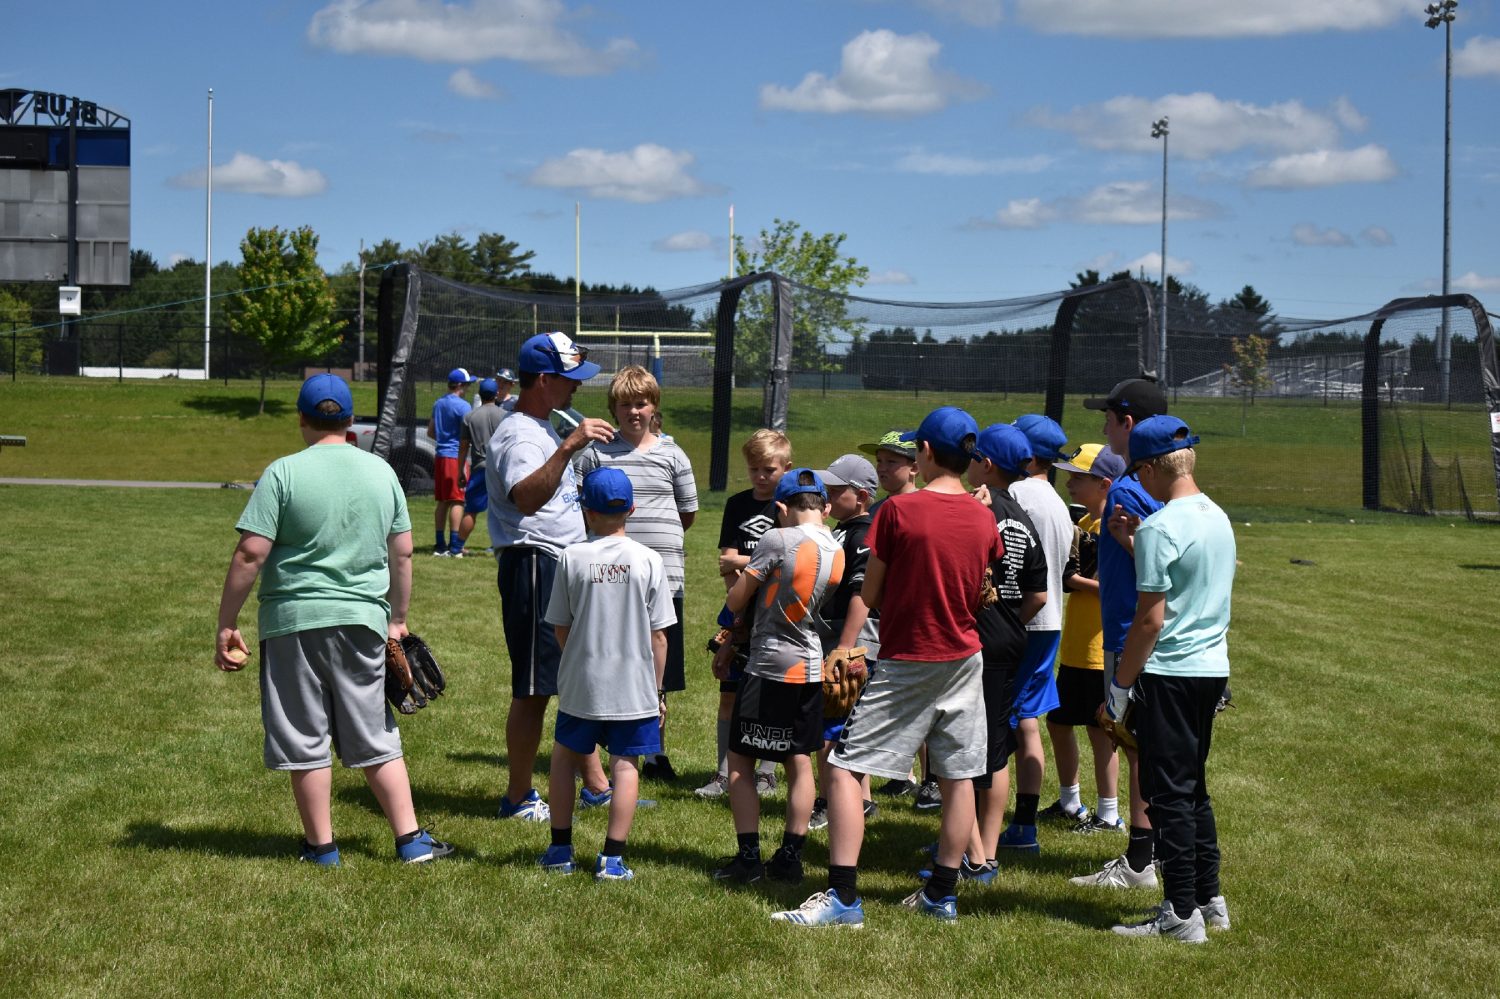 2019 youth baseball camp comes to a close